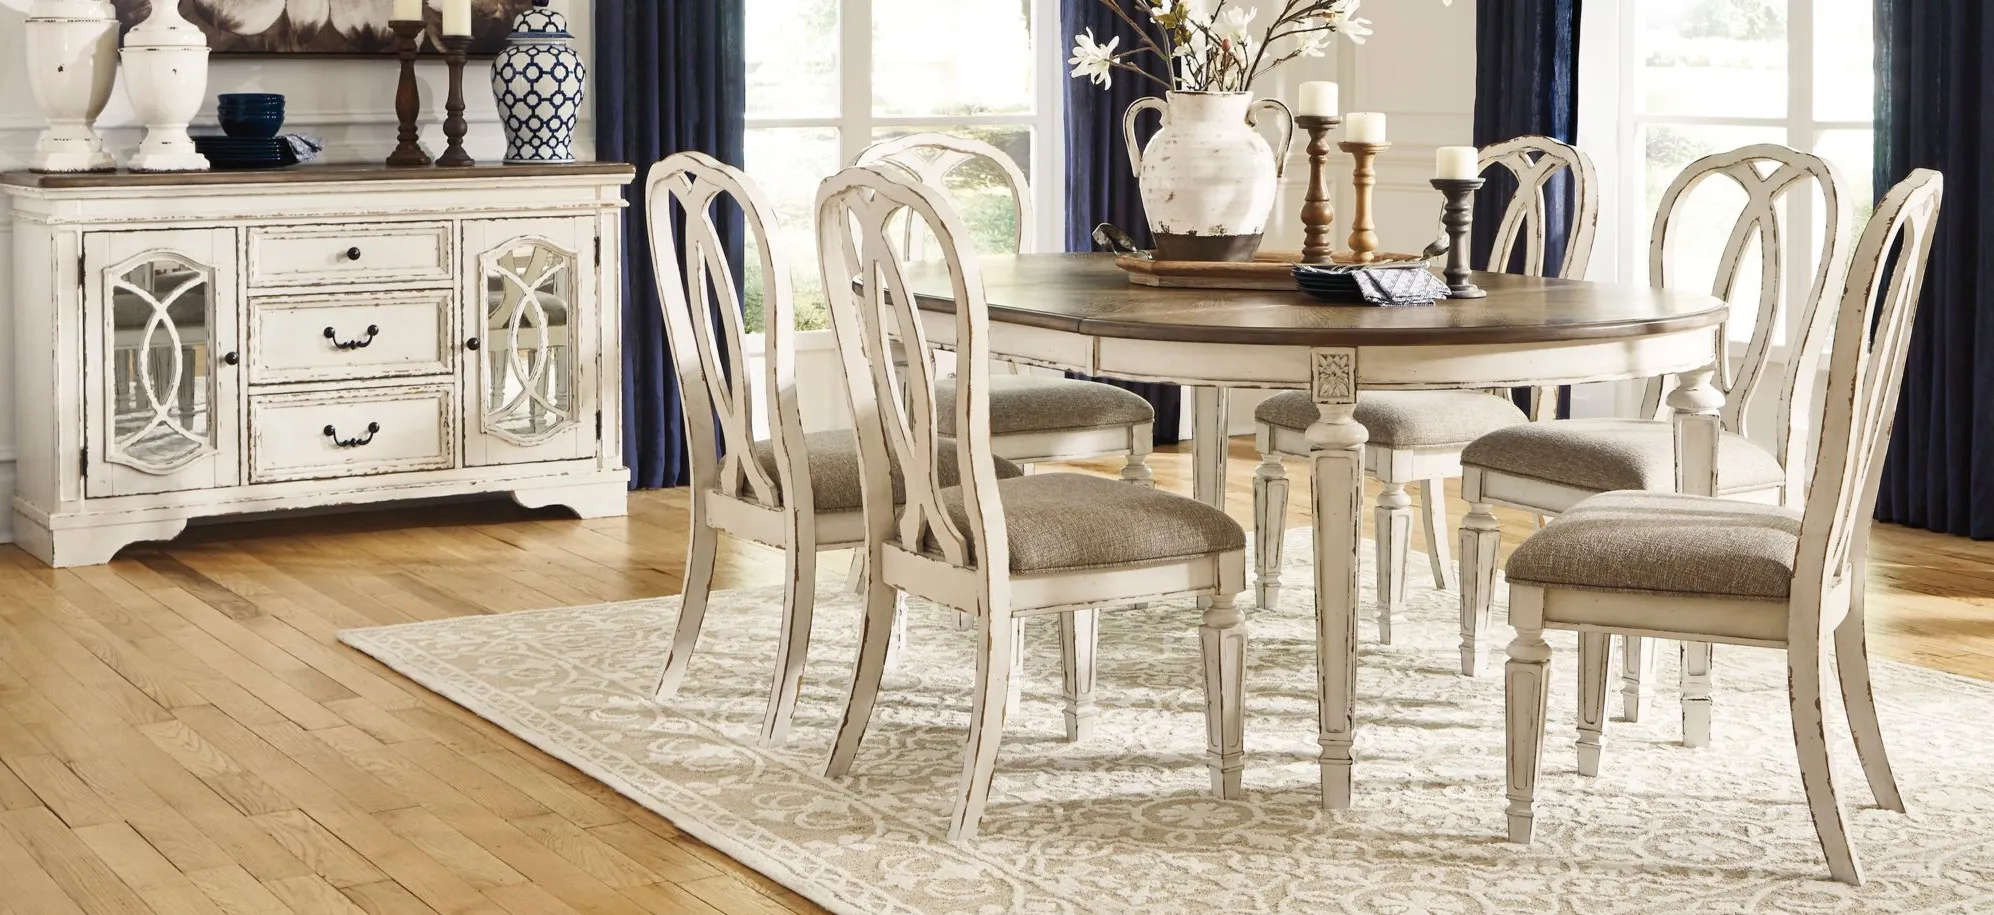 Delphine 7-pc. Dining Set in Chipped White by Ashley Furniture